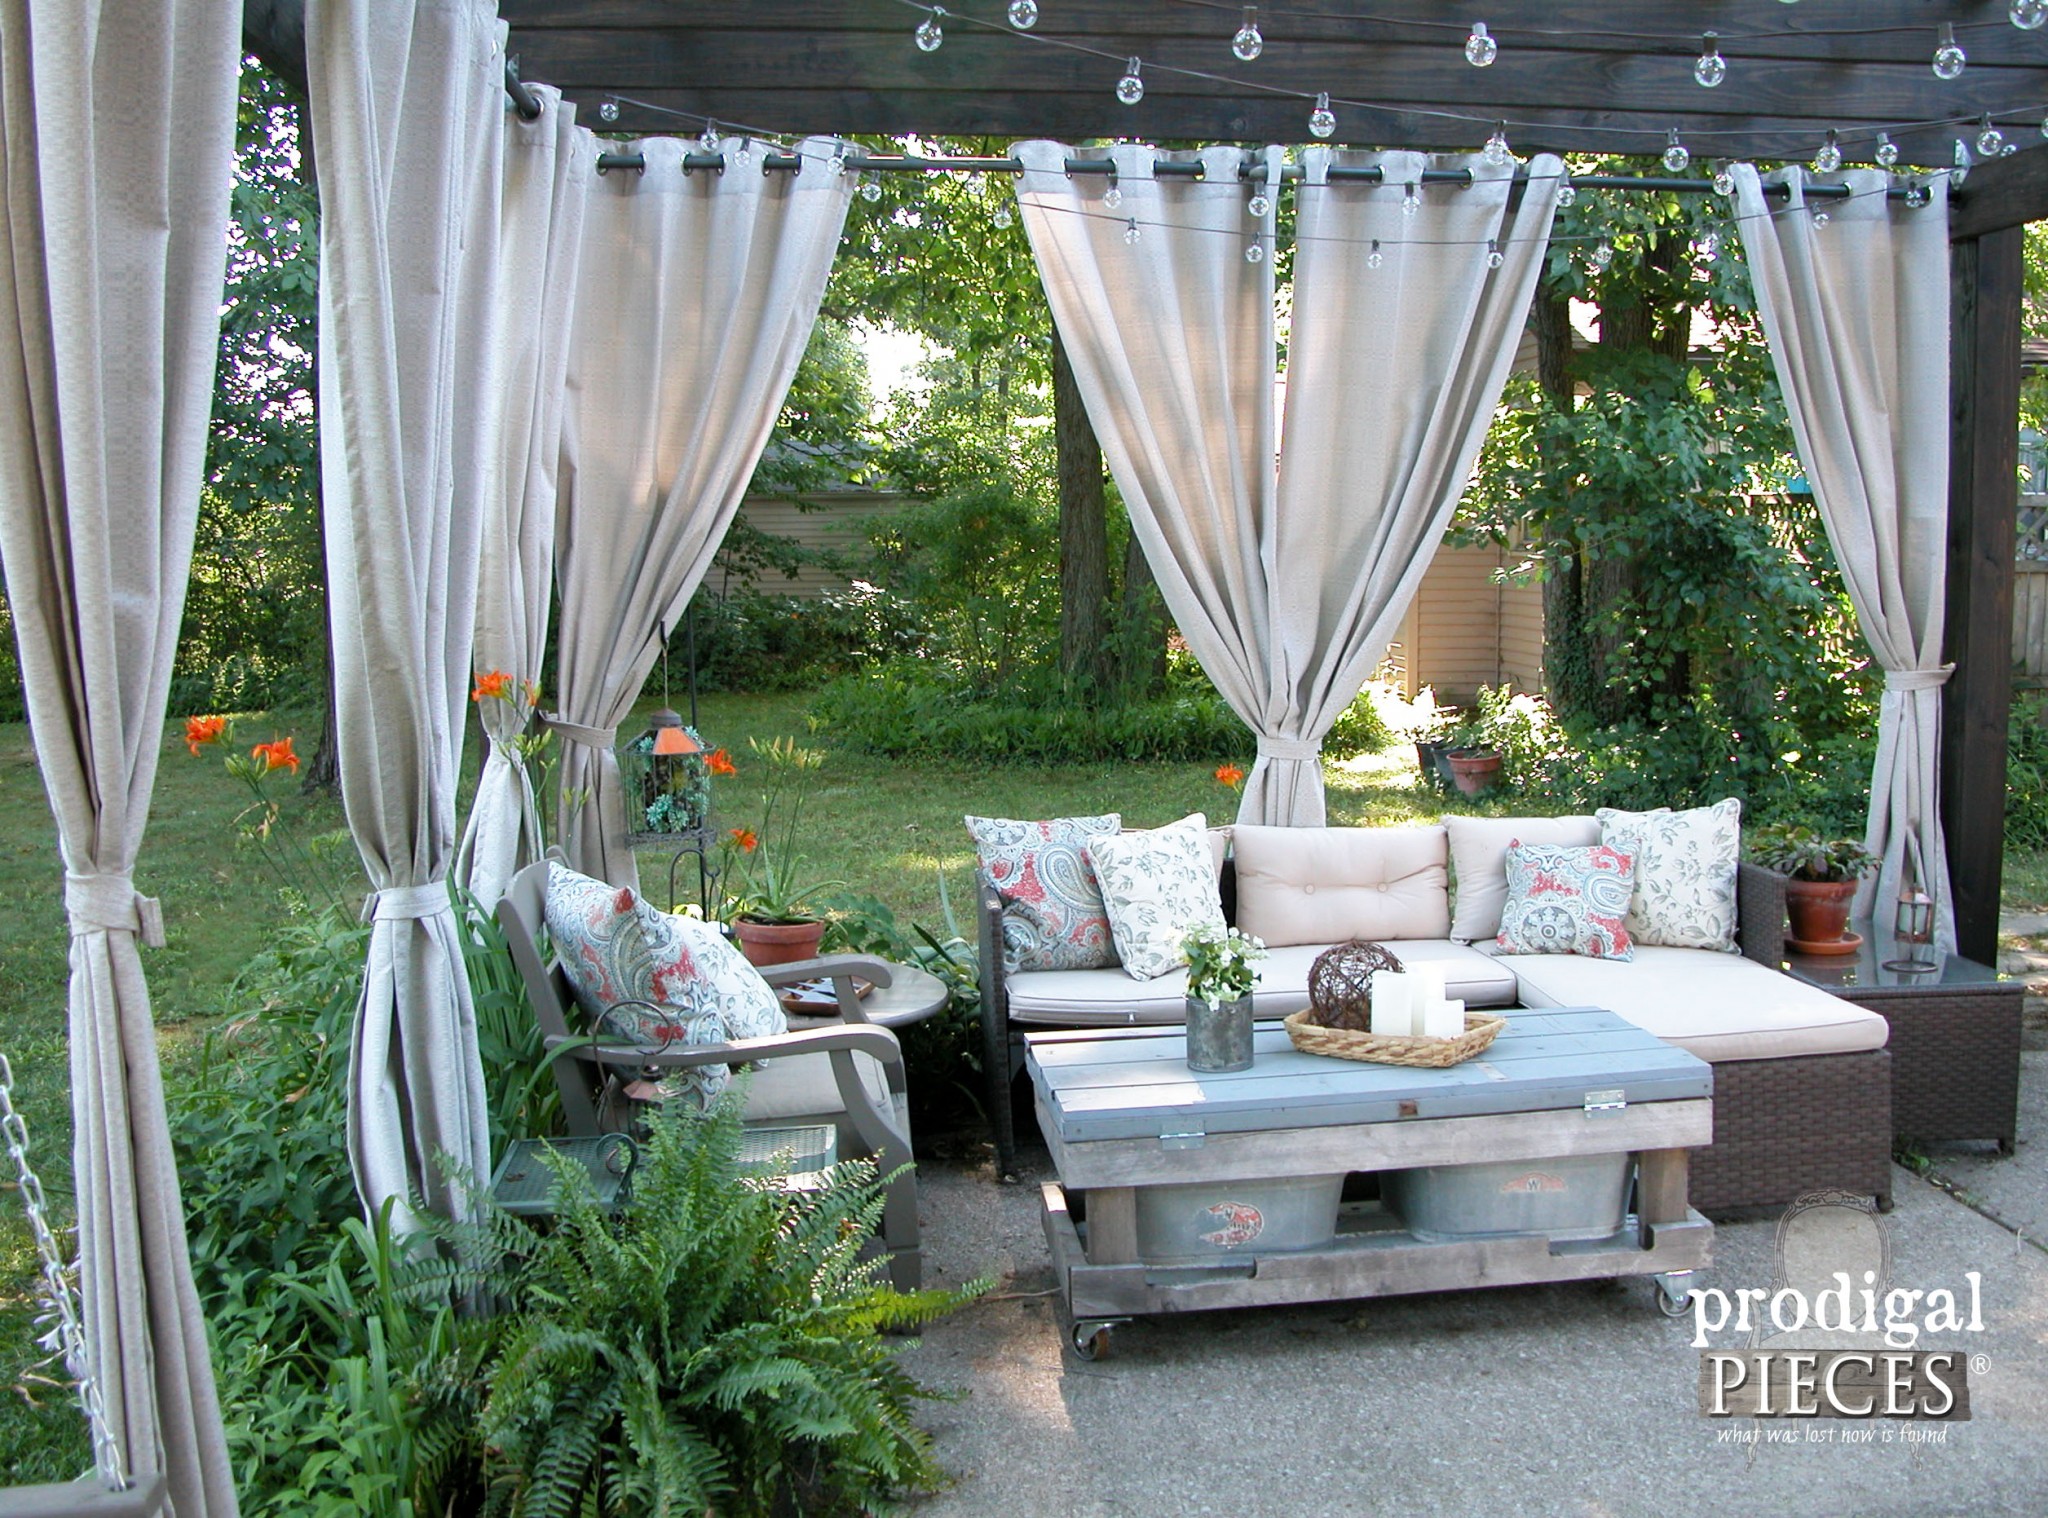 Seating Area with Outdoor Curtains on Pergola by Prodigal Pieces | www.prodigalpieces.com